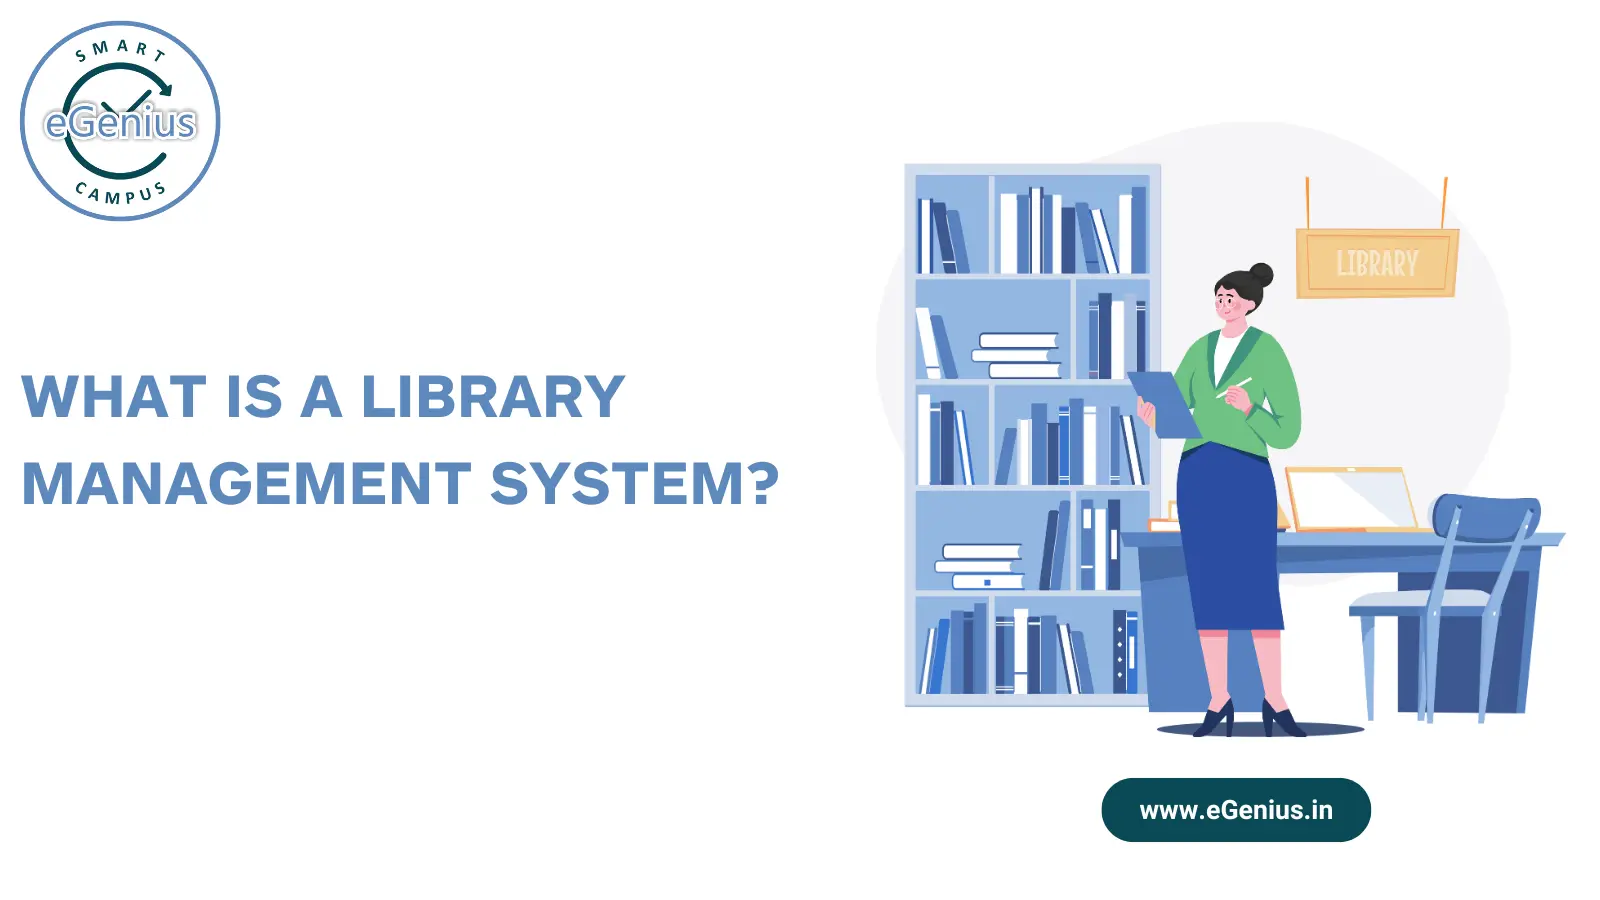 What is a Library Management System?